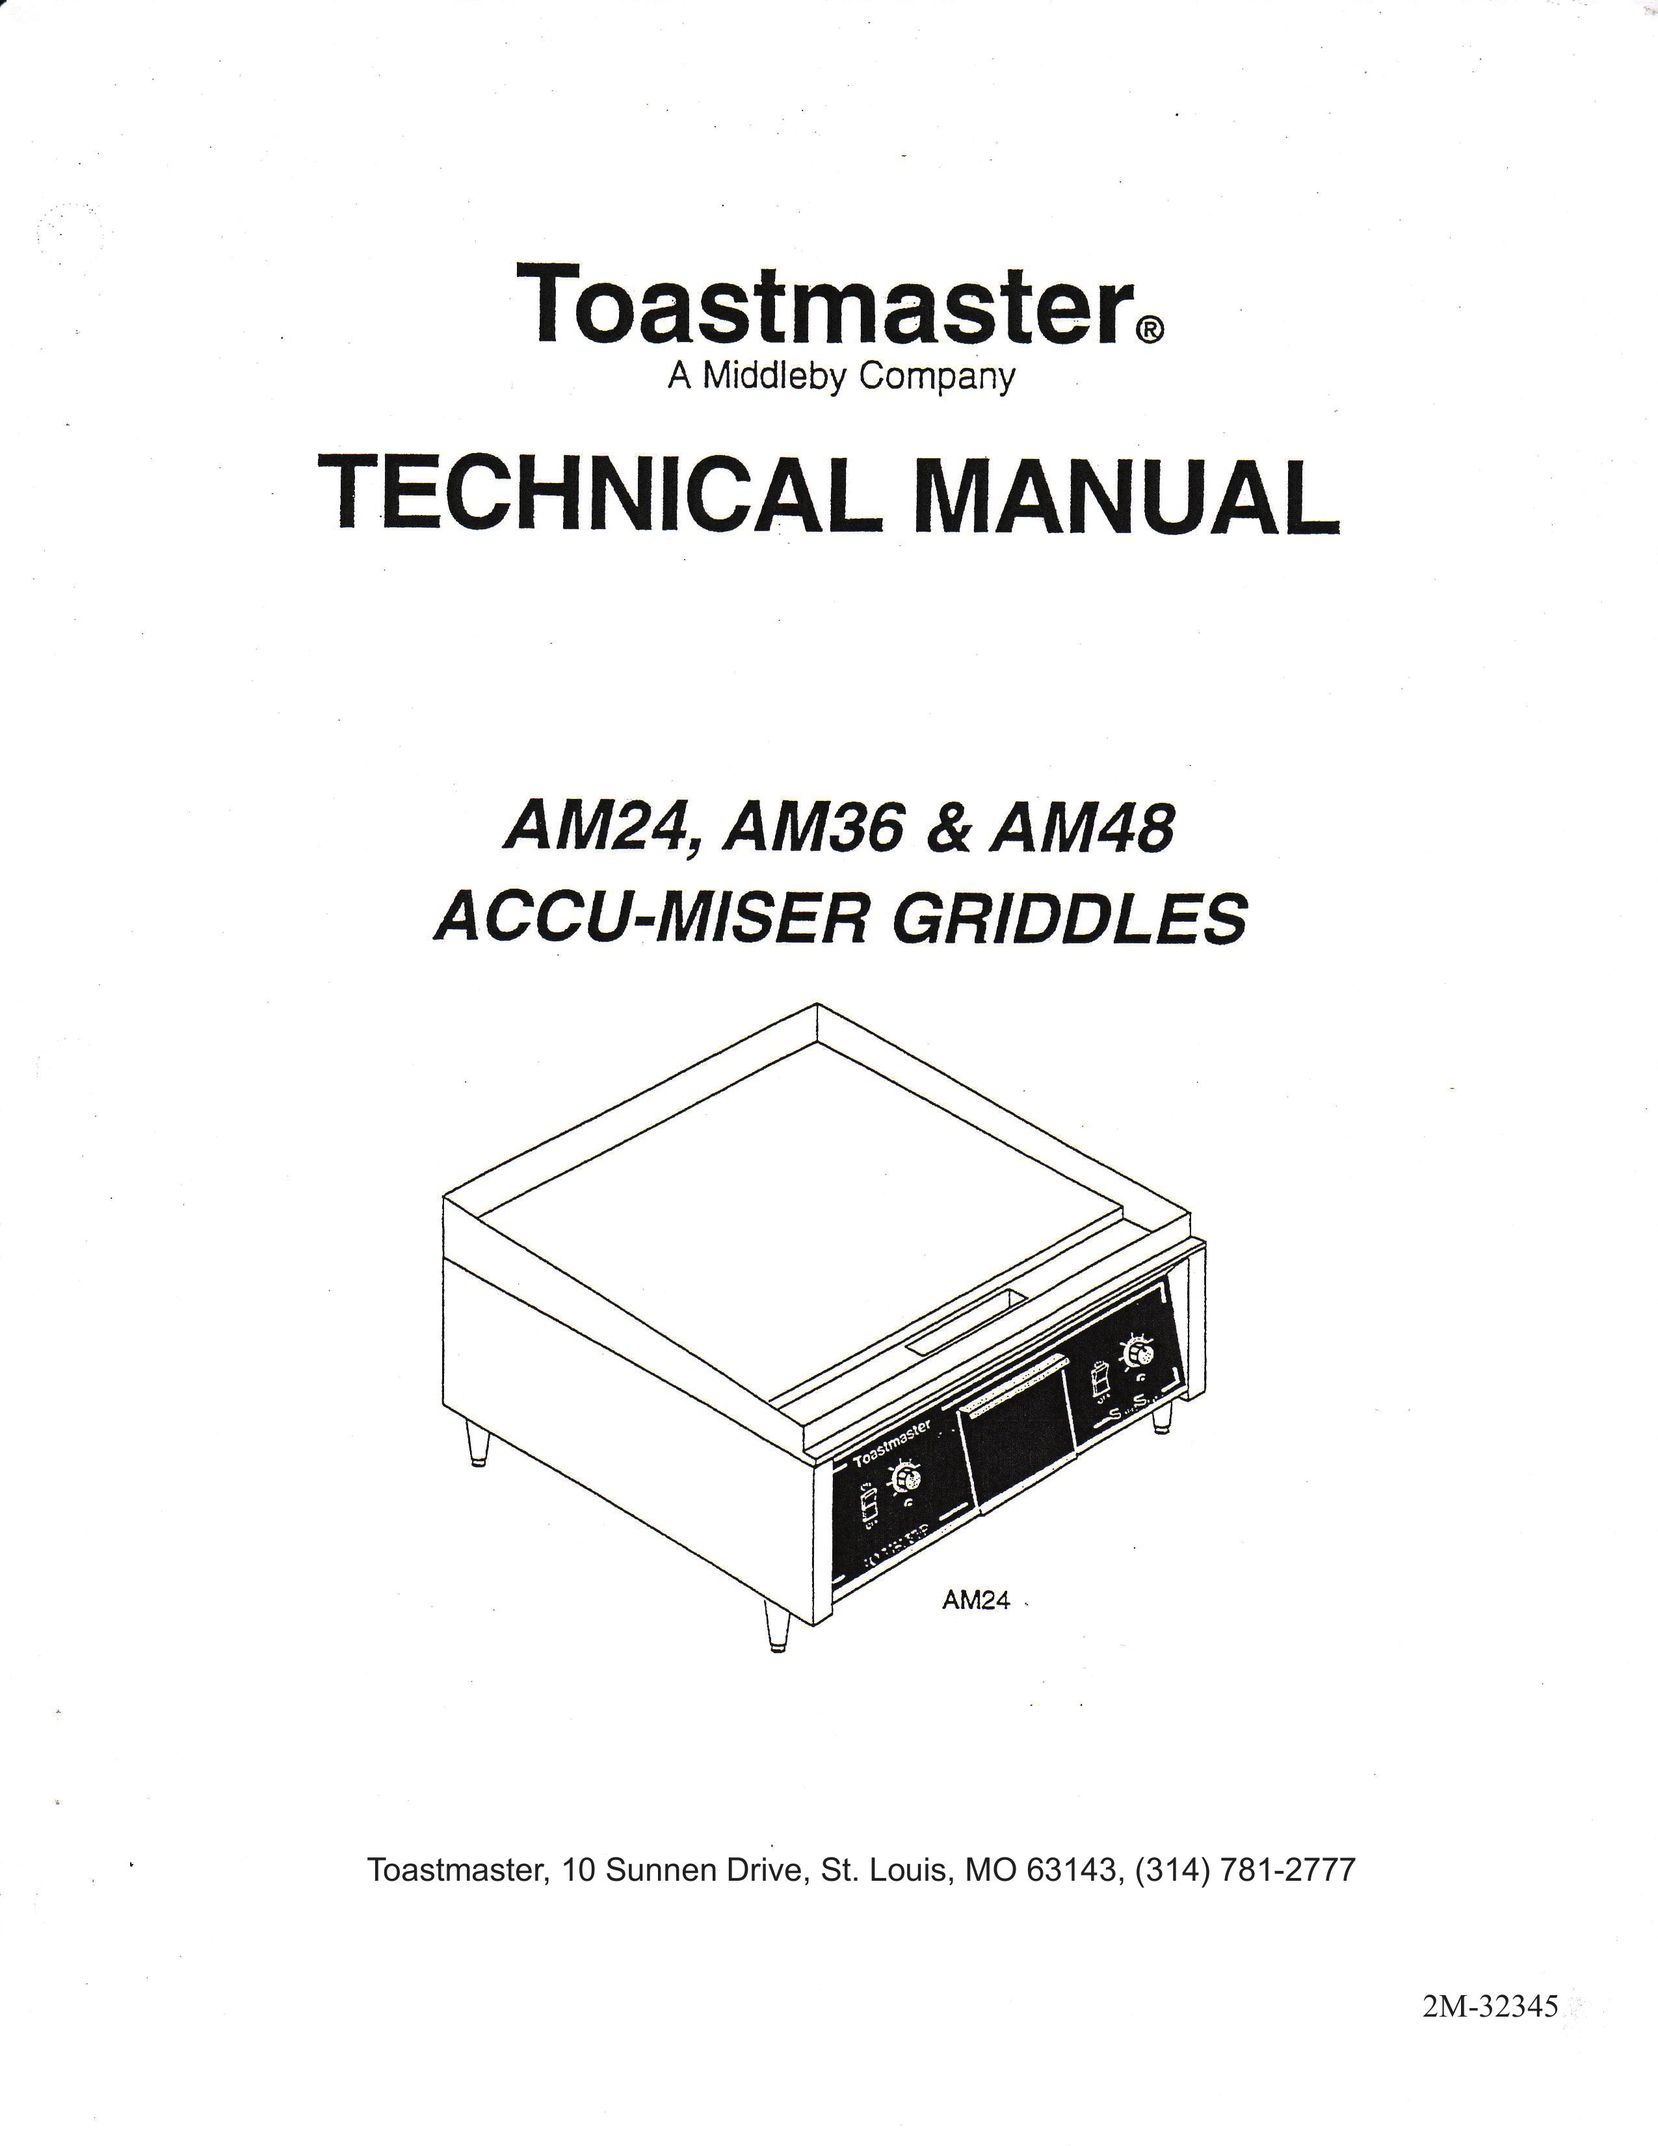 Toastmaster AM24 Cooktop User Manual